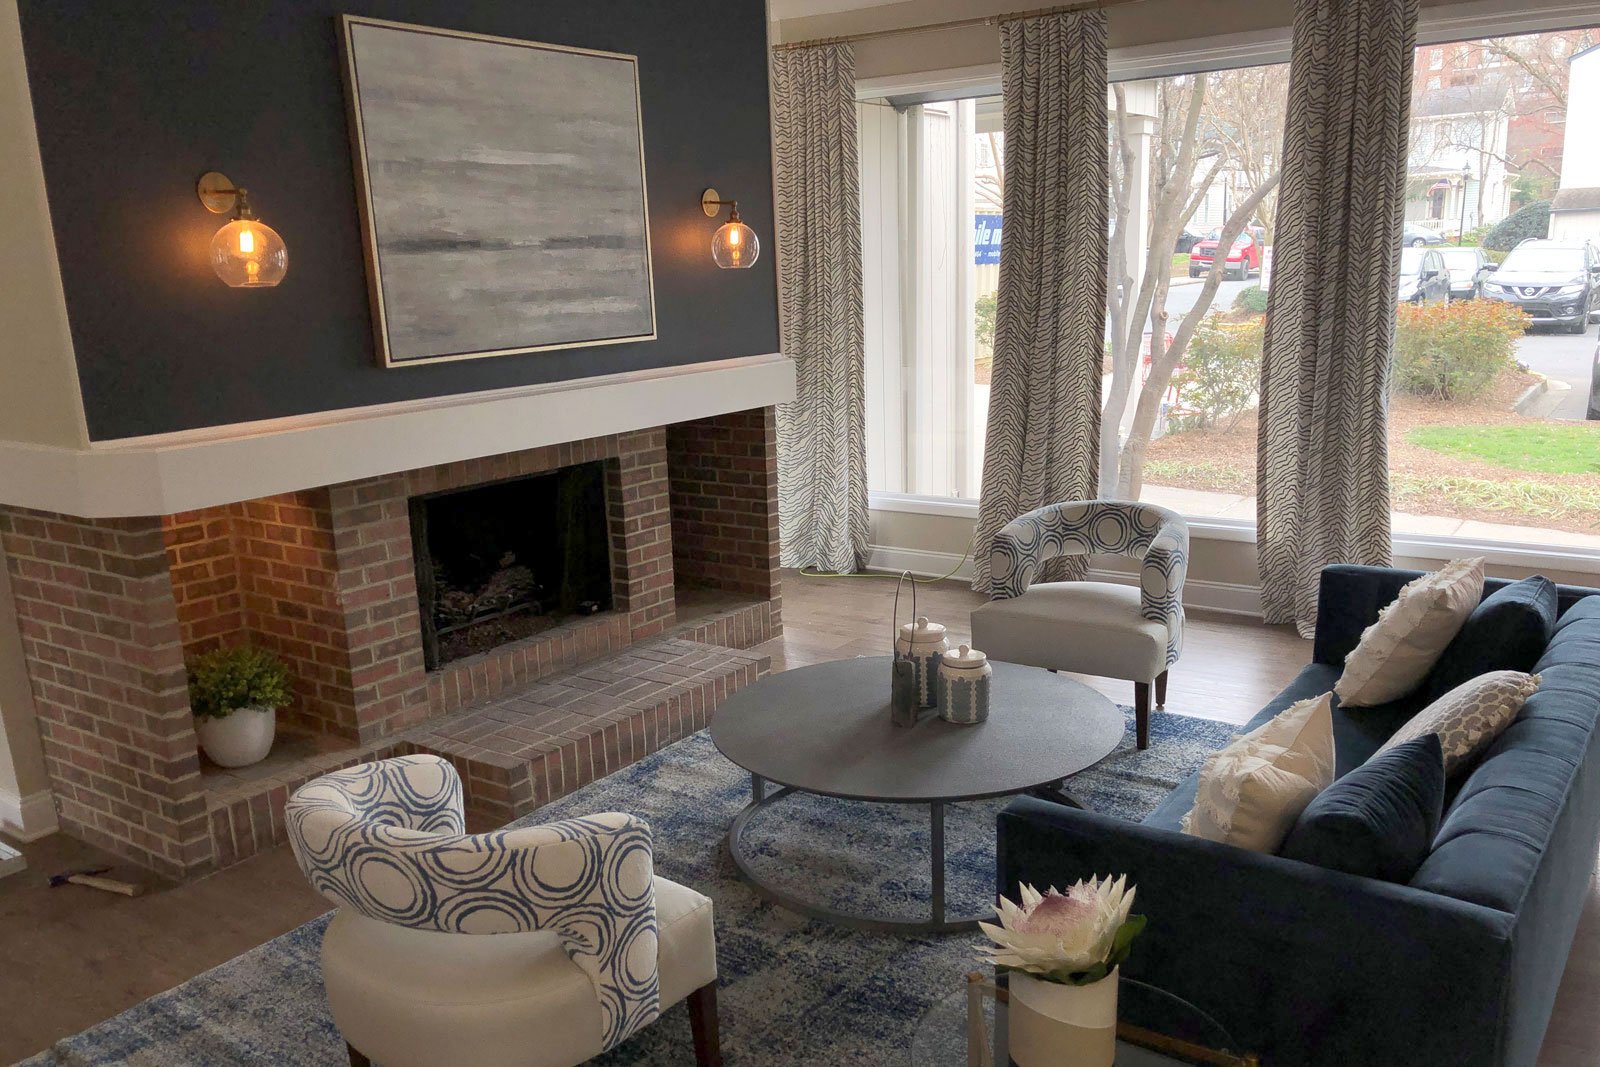 A wooden circular table sits in the middle of a patterned chair, velvet couch, brick fireplace and gold-rimmed painting with grey patterned cushions over the white windows